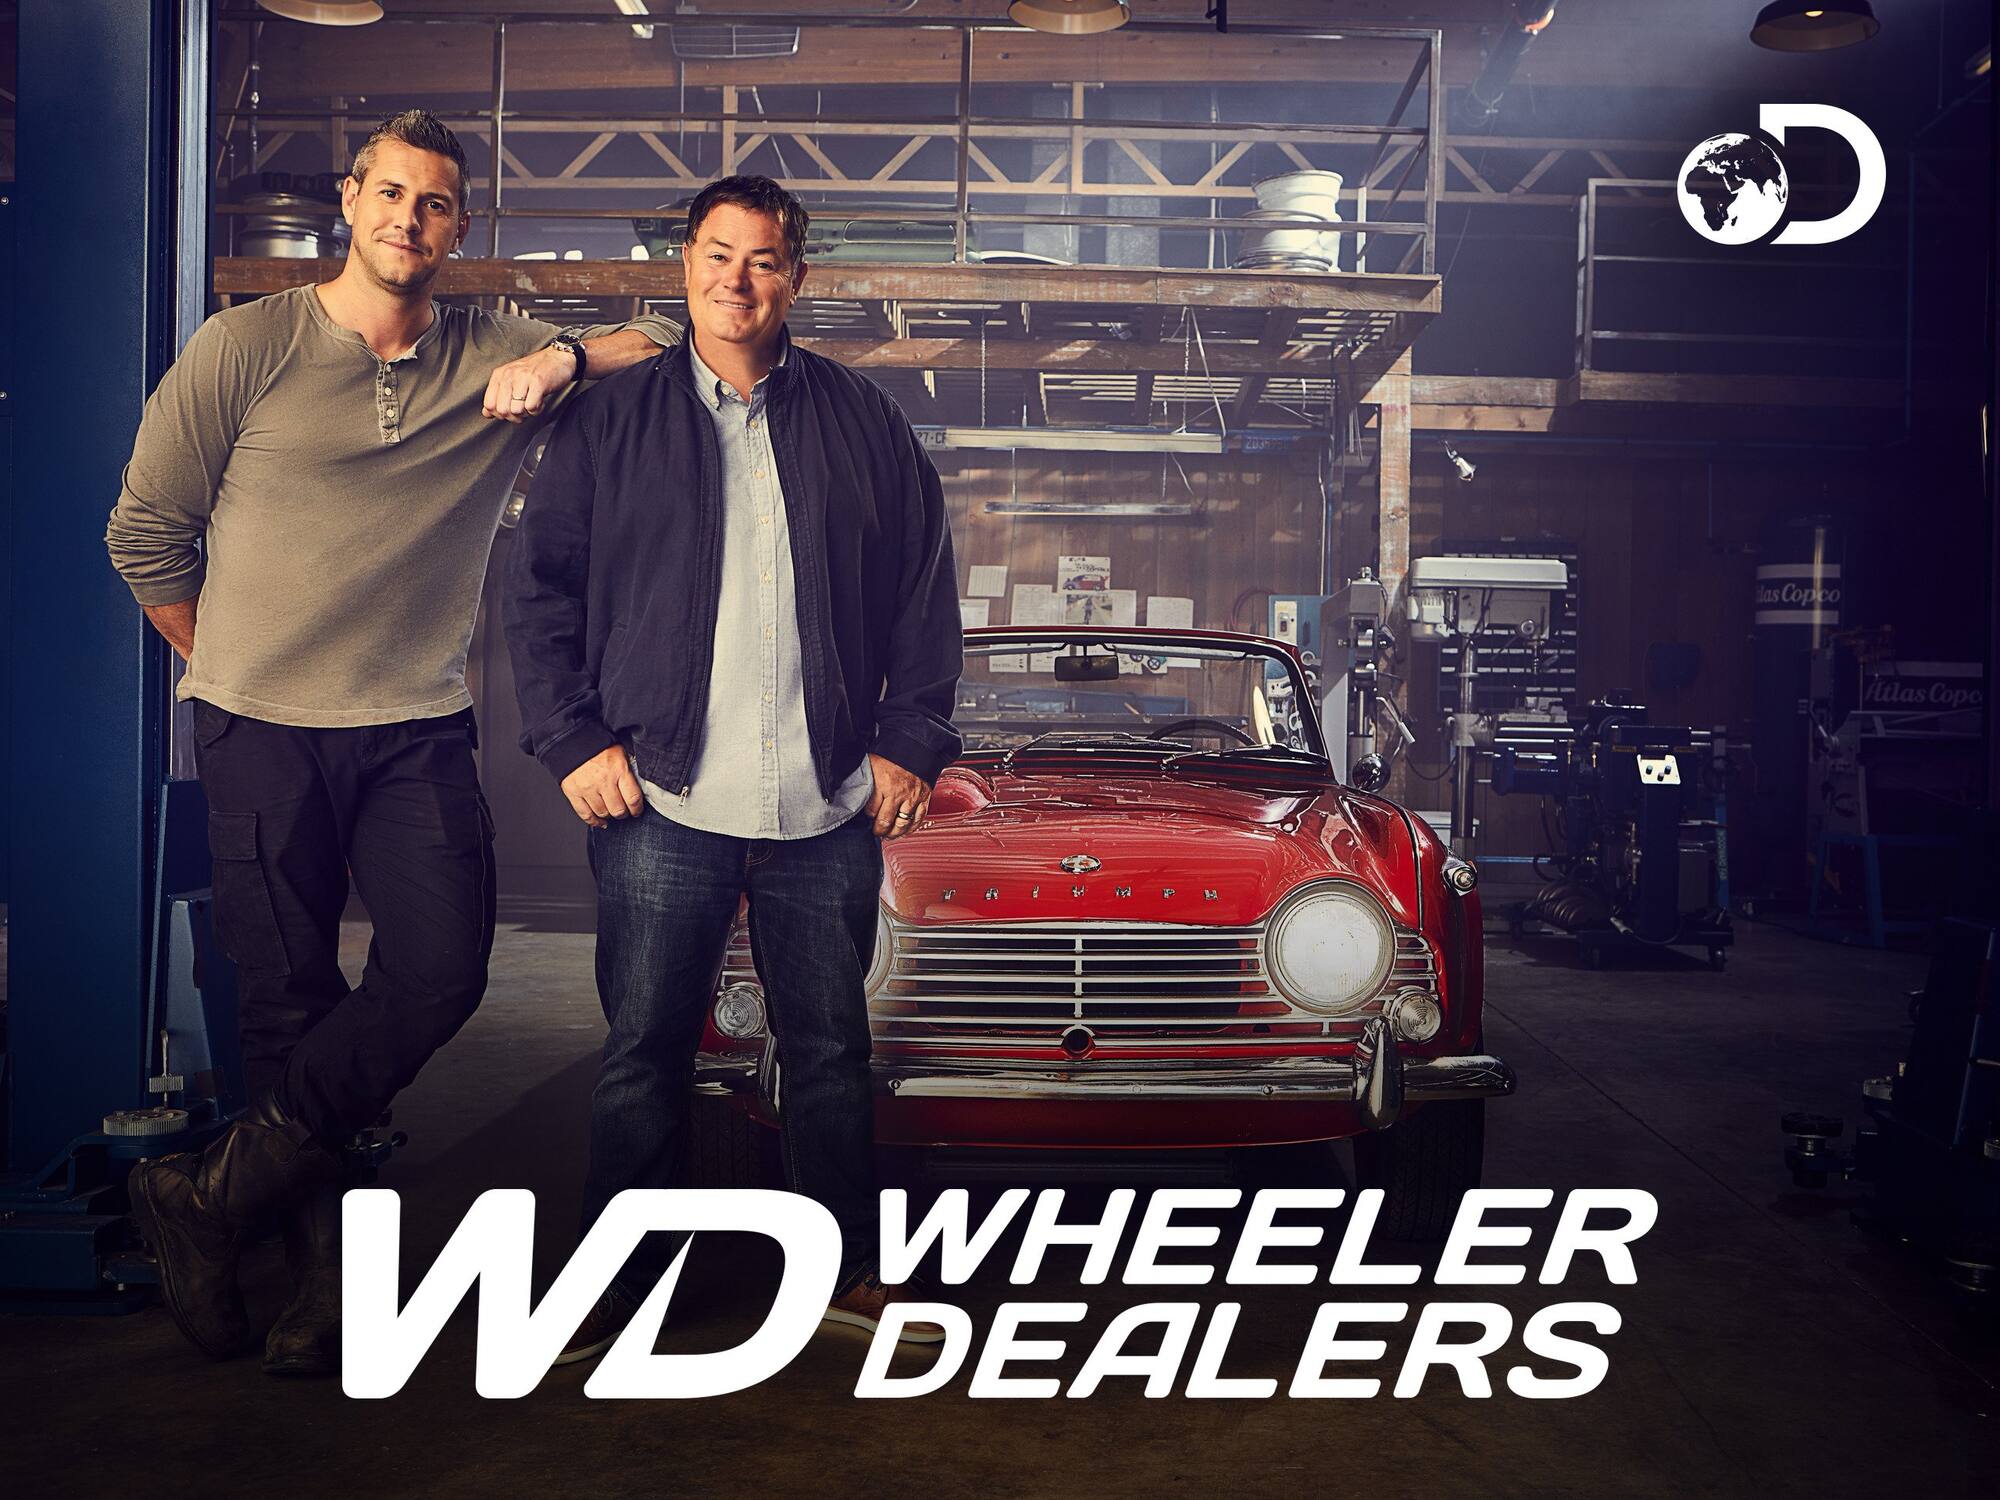 The truth about wheeler dealers